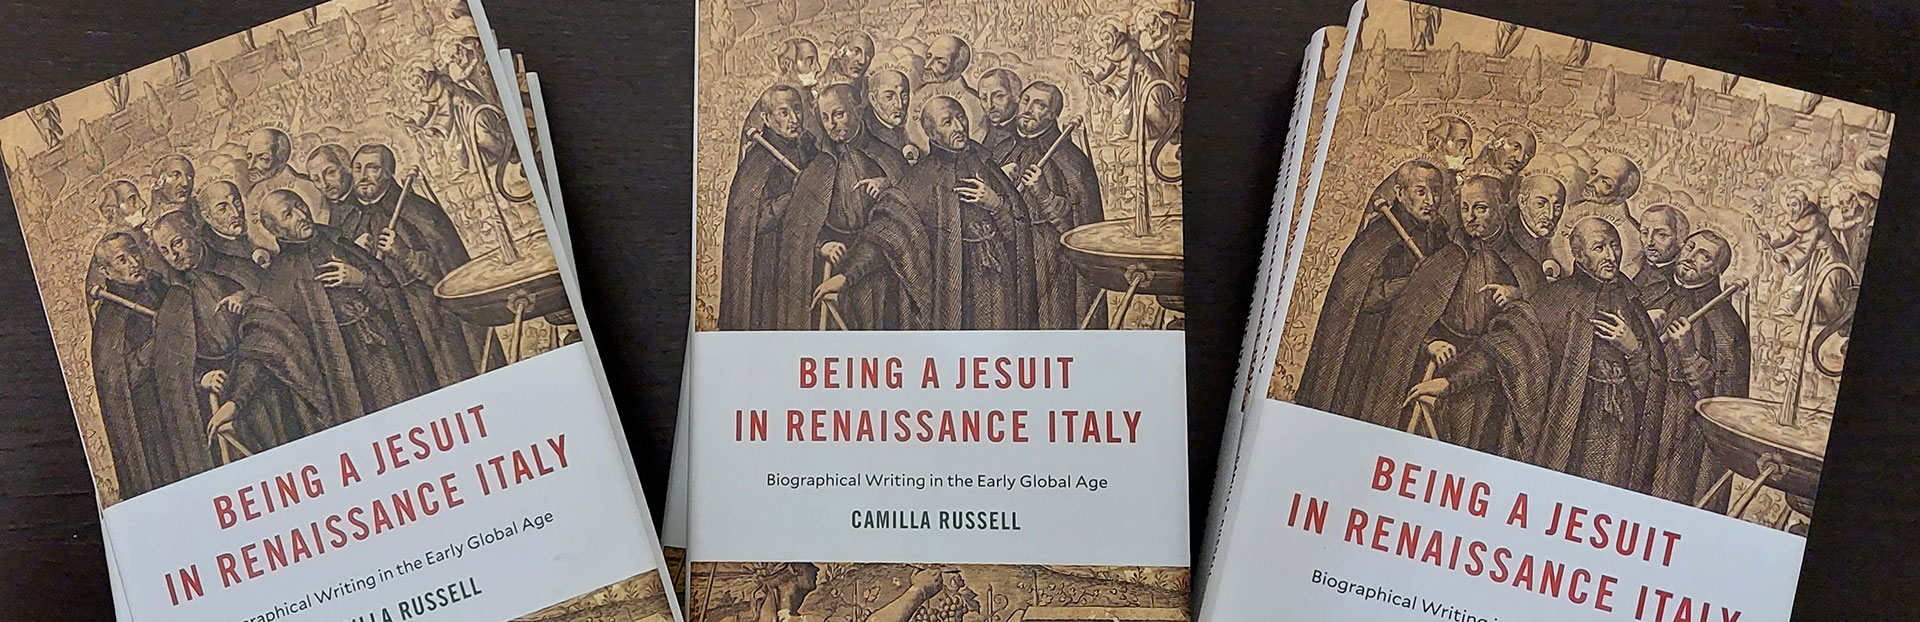 Are the Jesuits of the 16th century and the Jesuits of today very different?